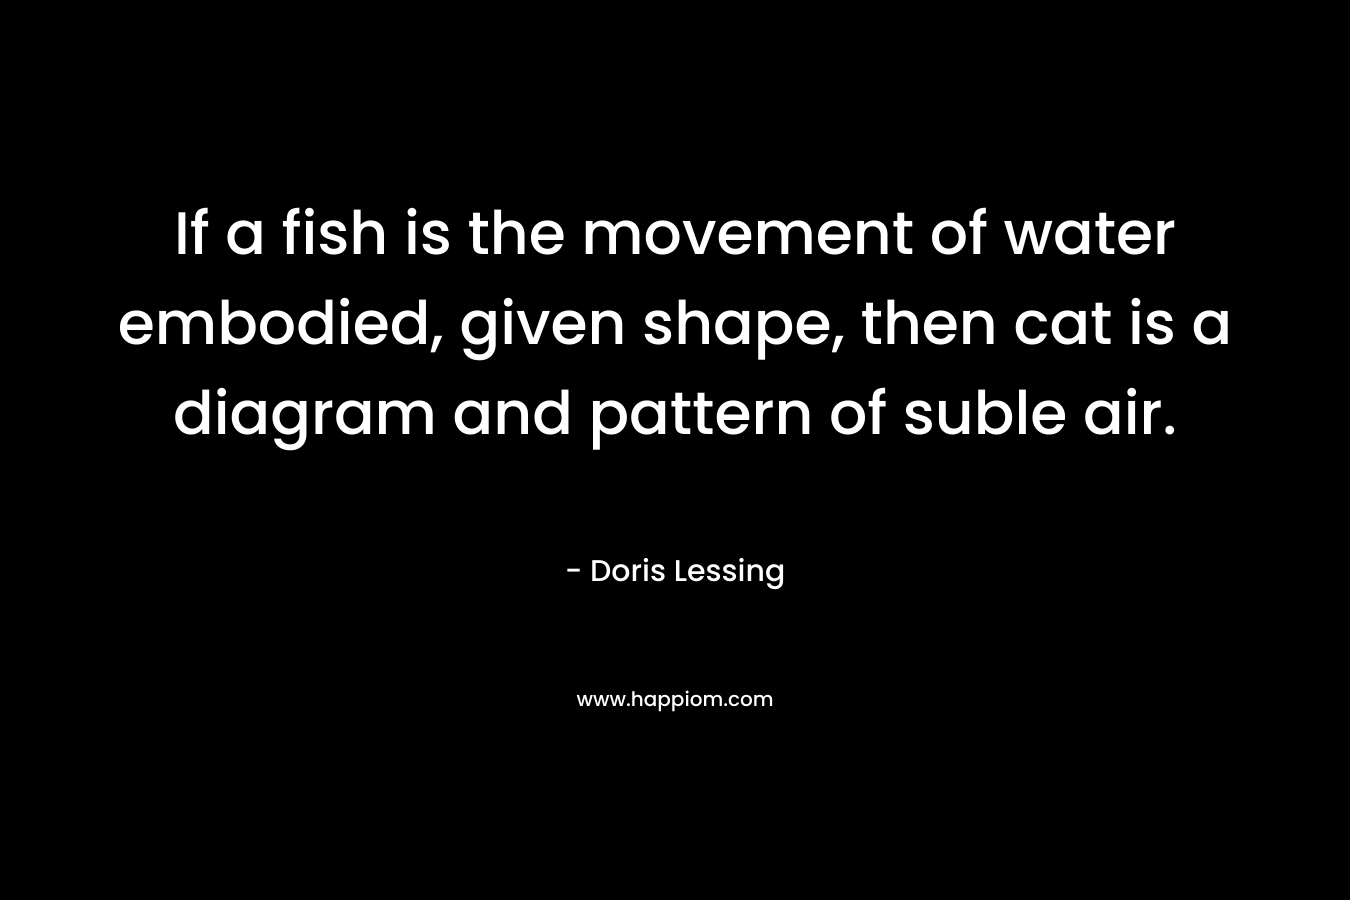 If a fish is the movement of water embodied, given shape, then cat is a diagram and pattern of suble air. – Doris Lessing